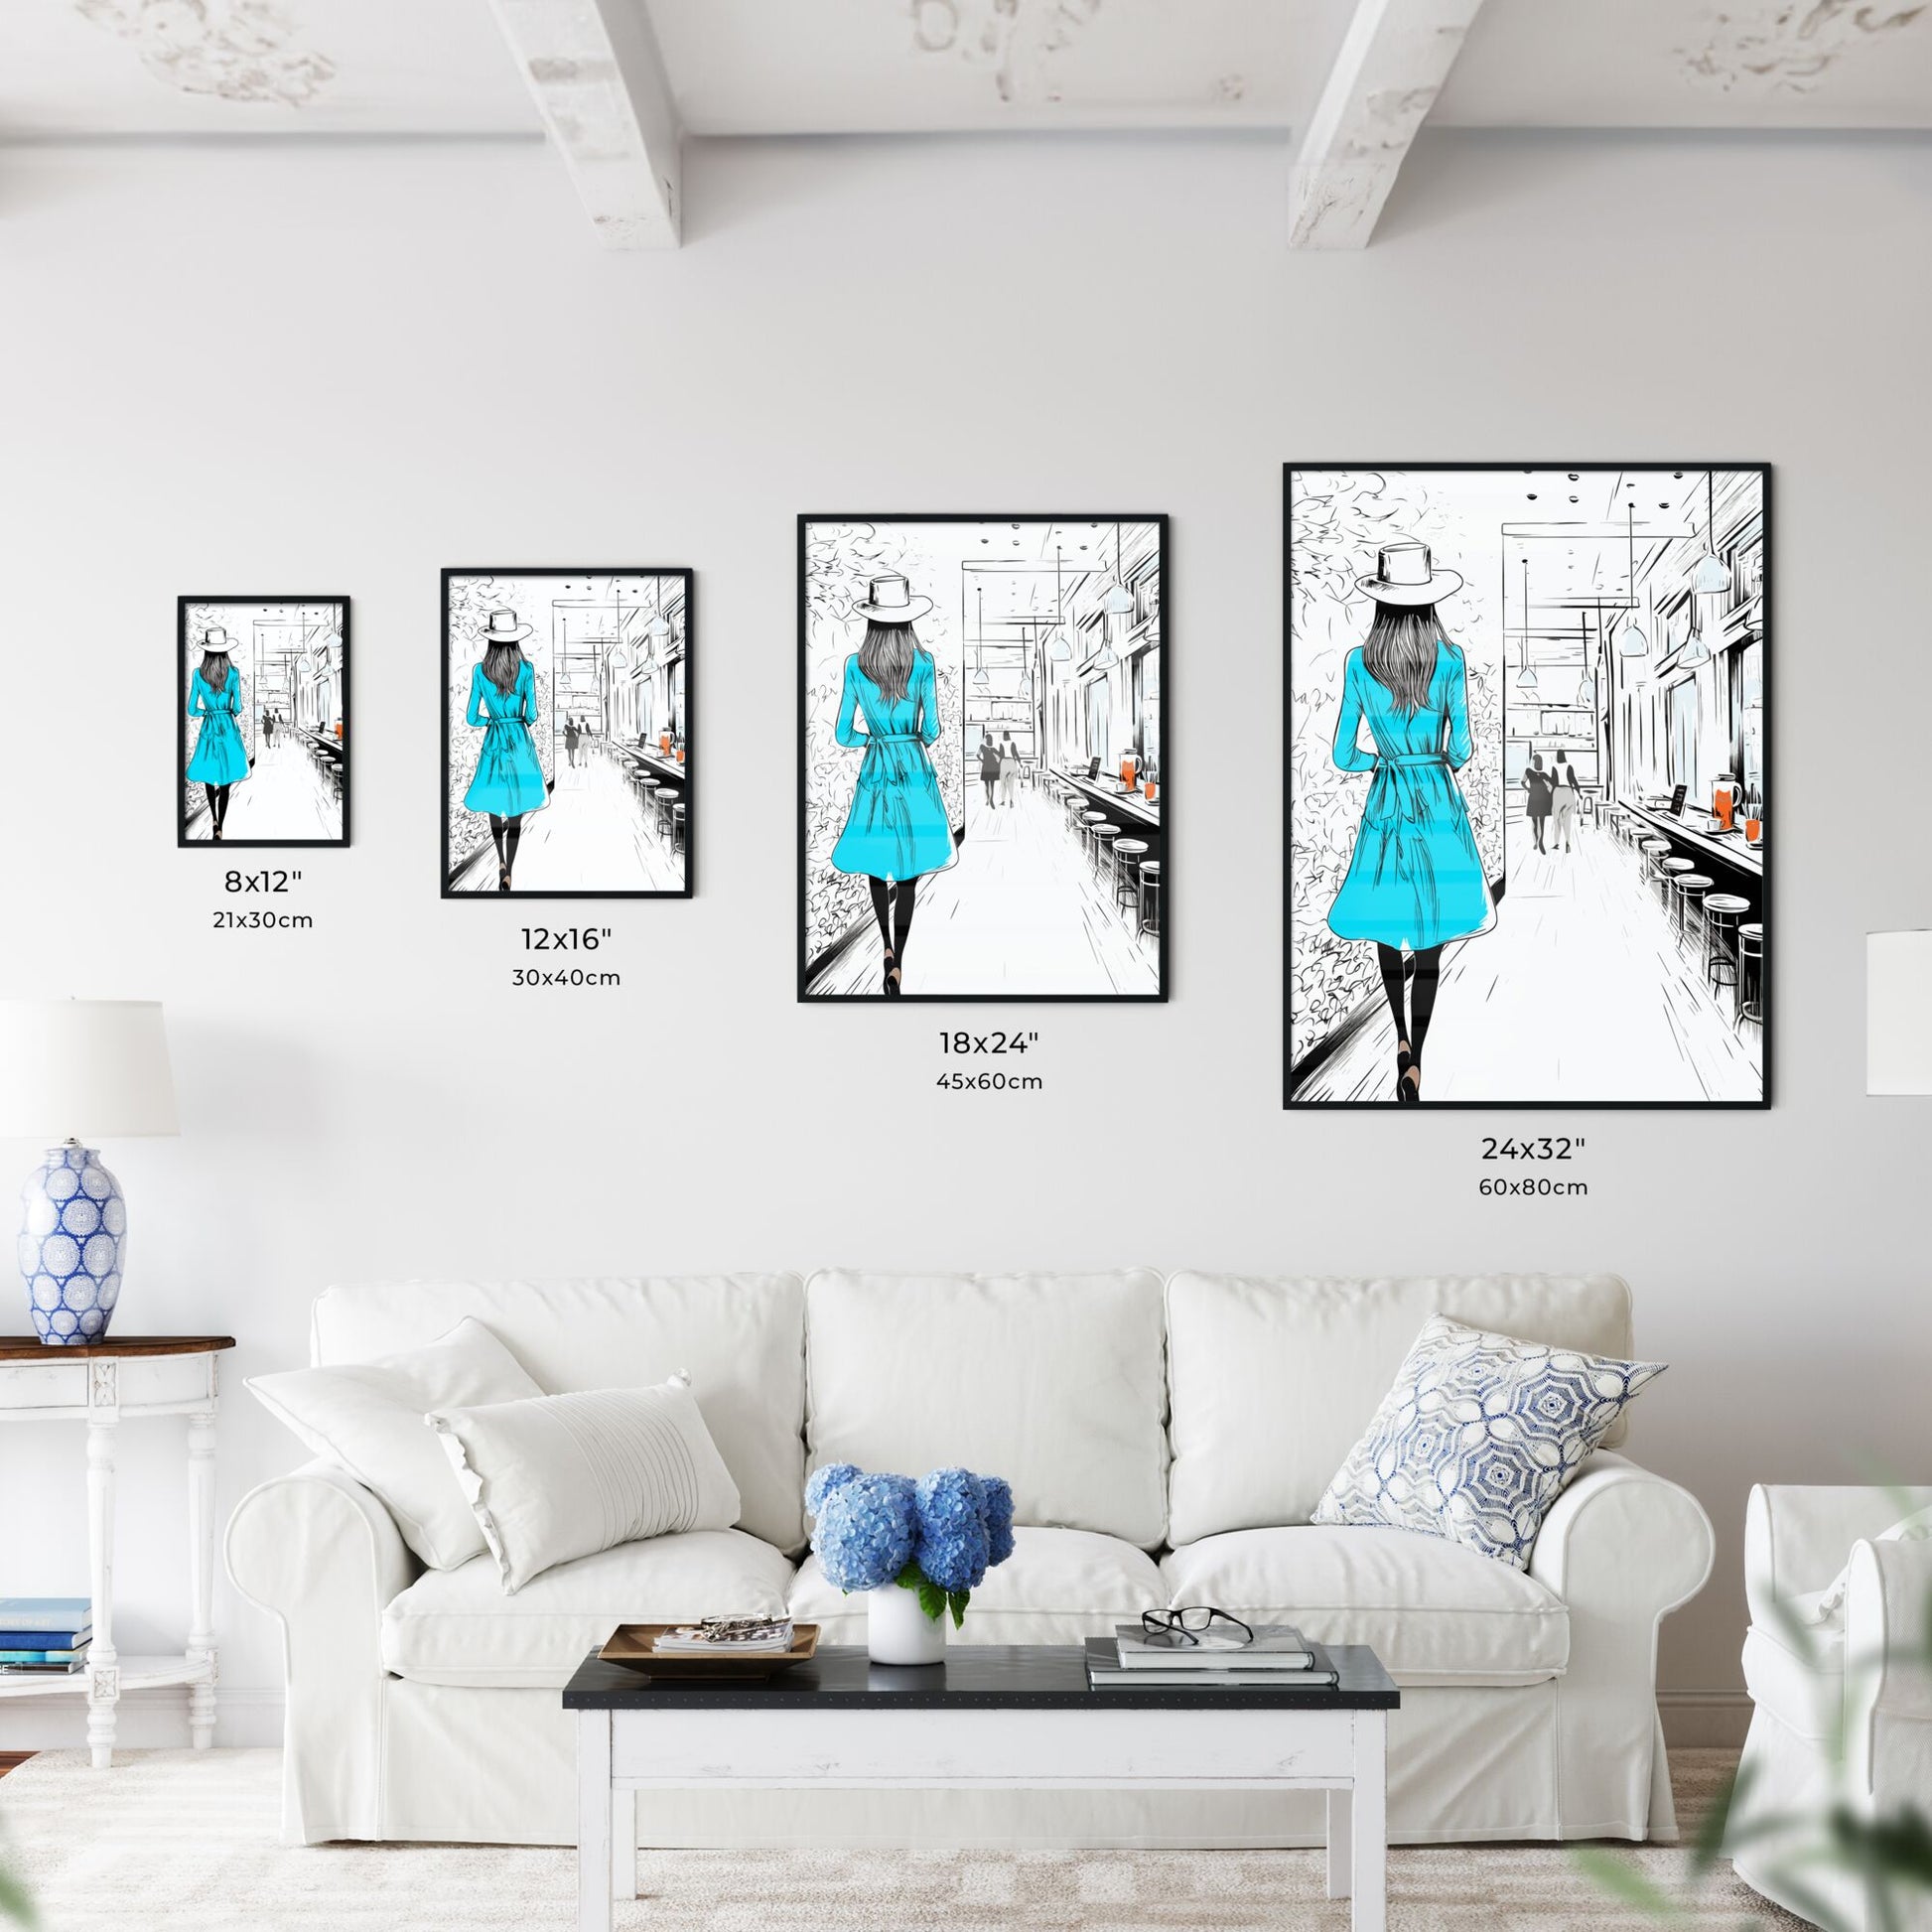 Lifestyle Fashion Illustration In The Coffee Bar - A Woman In A Blue Dress Default Title